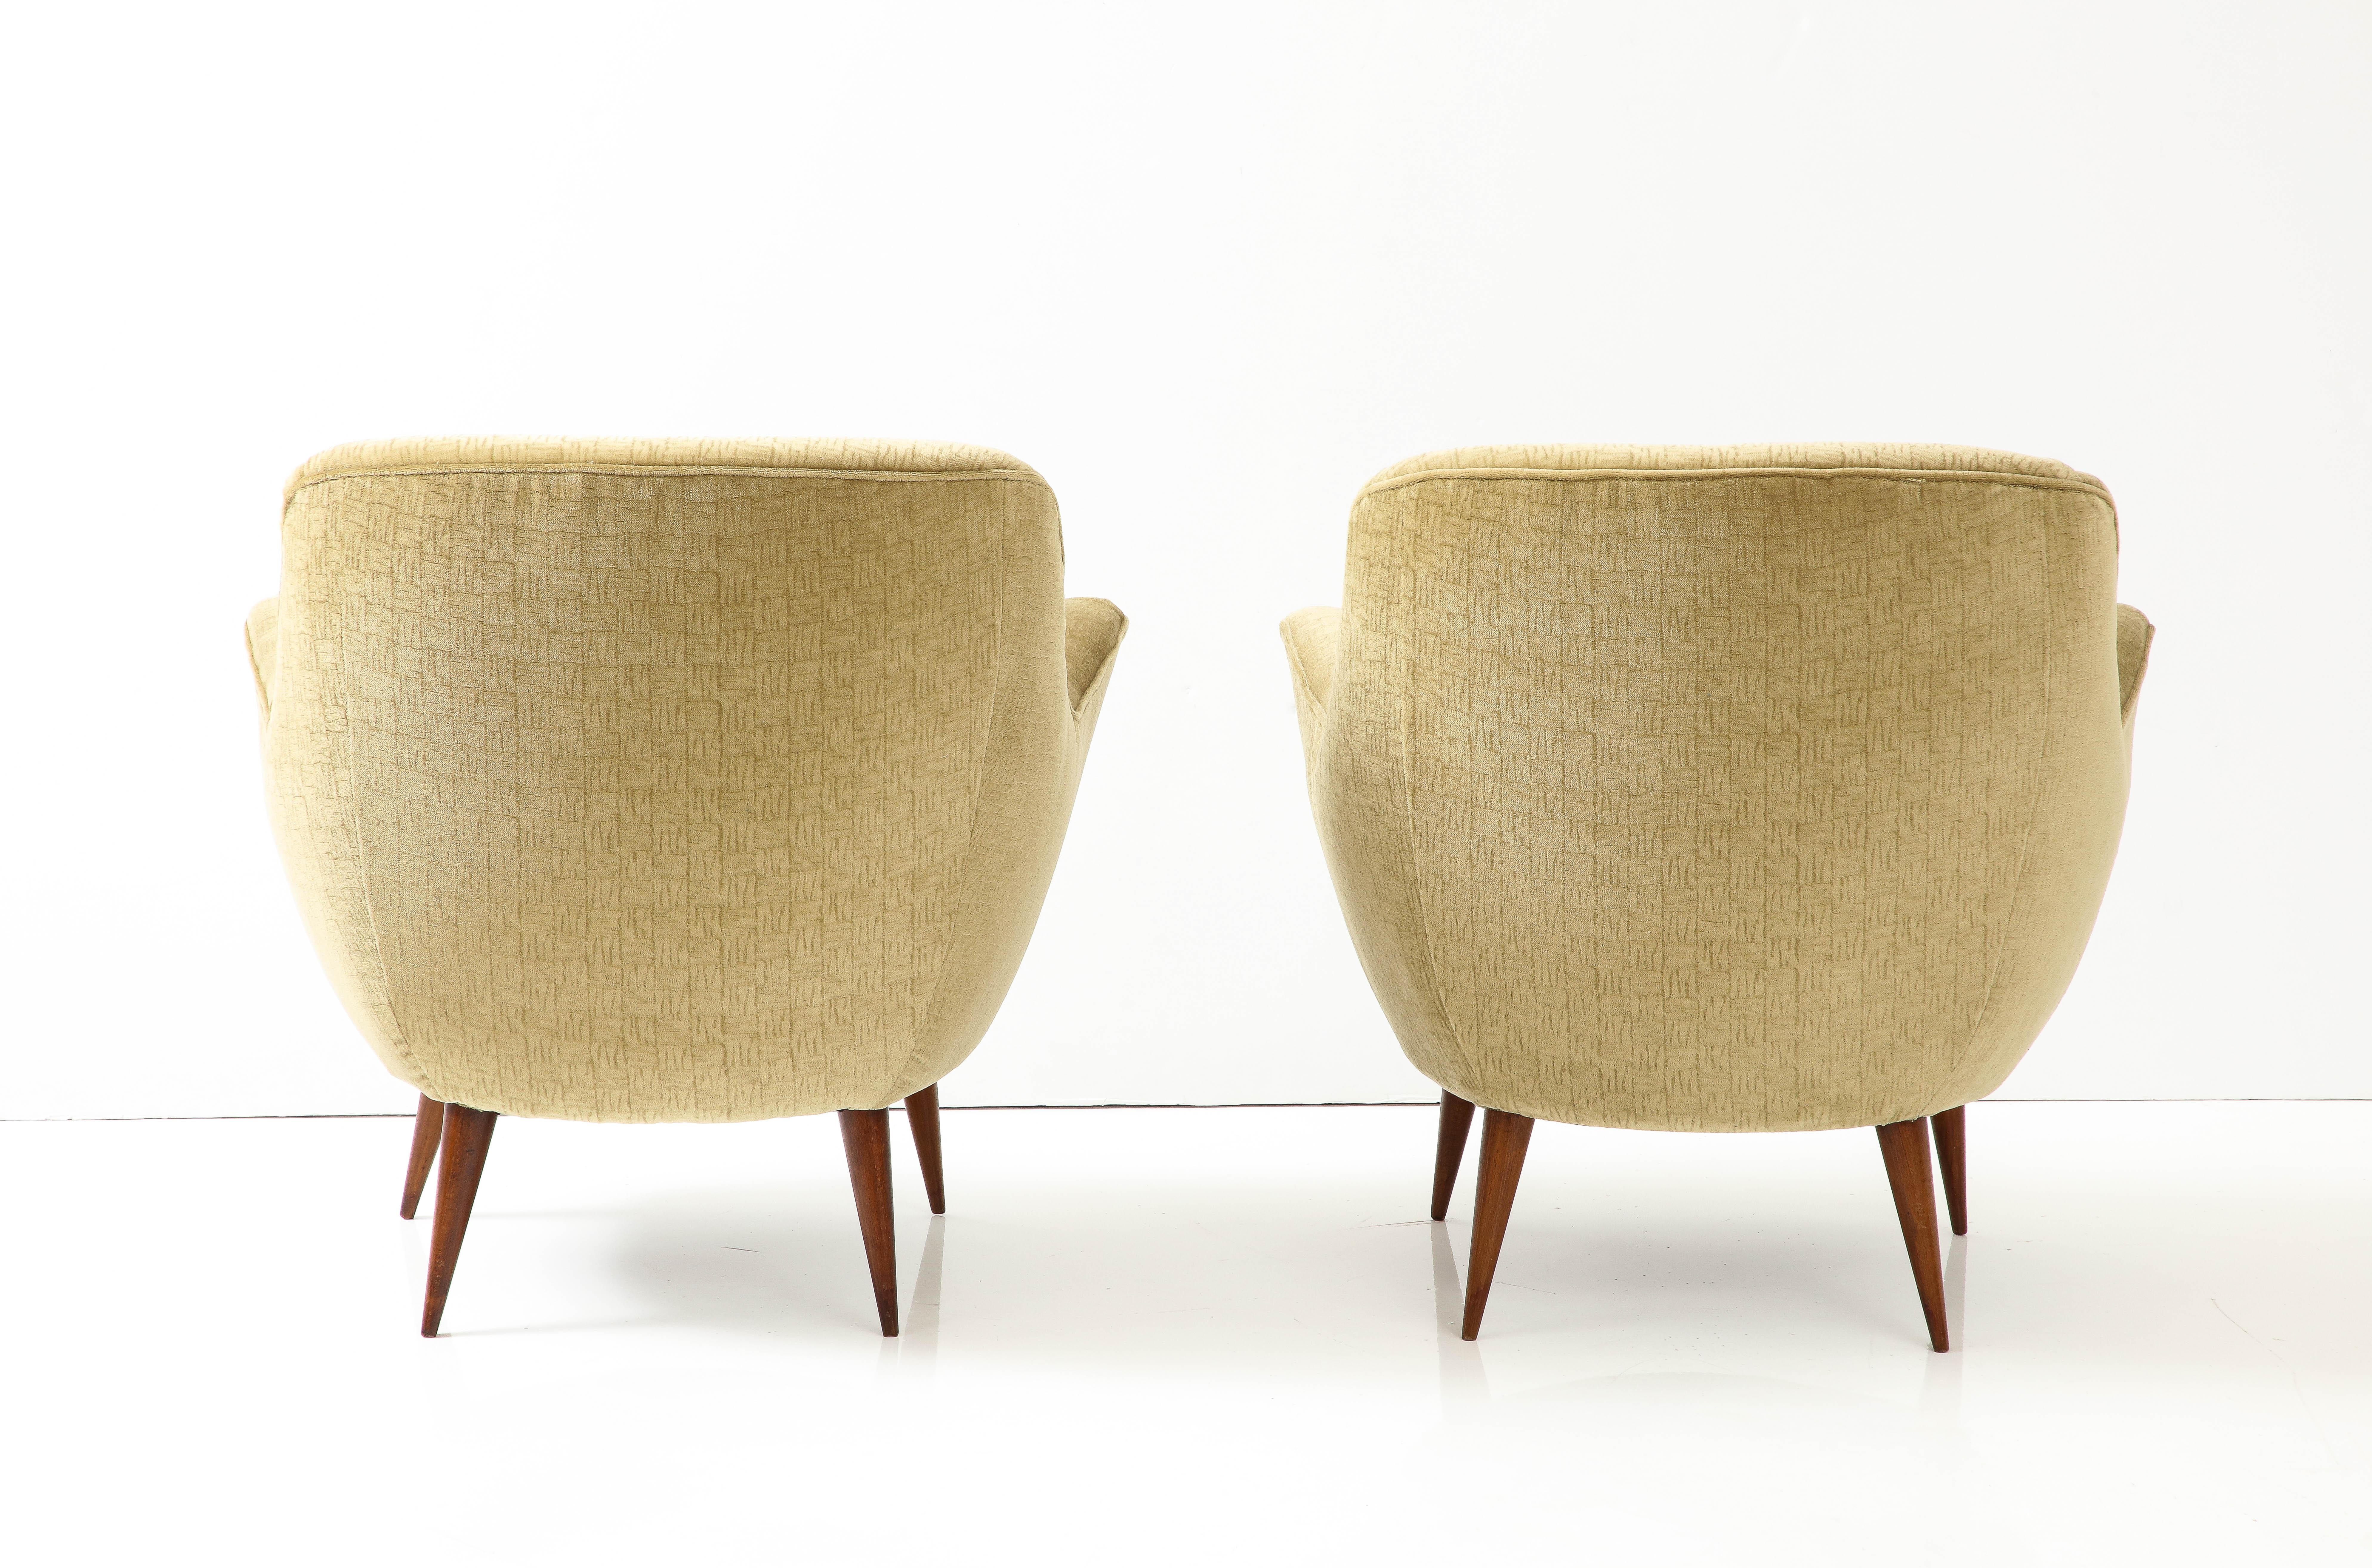 1950's Modernist Gio Ponti Style Italian Lounge Chairs In Mohair Upholstery For Sale 4